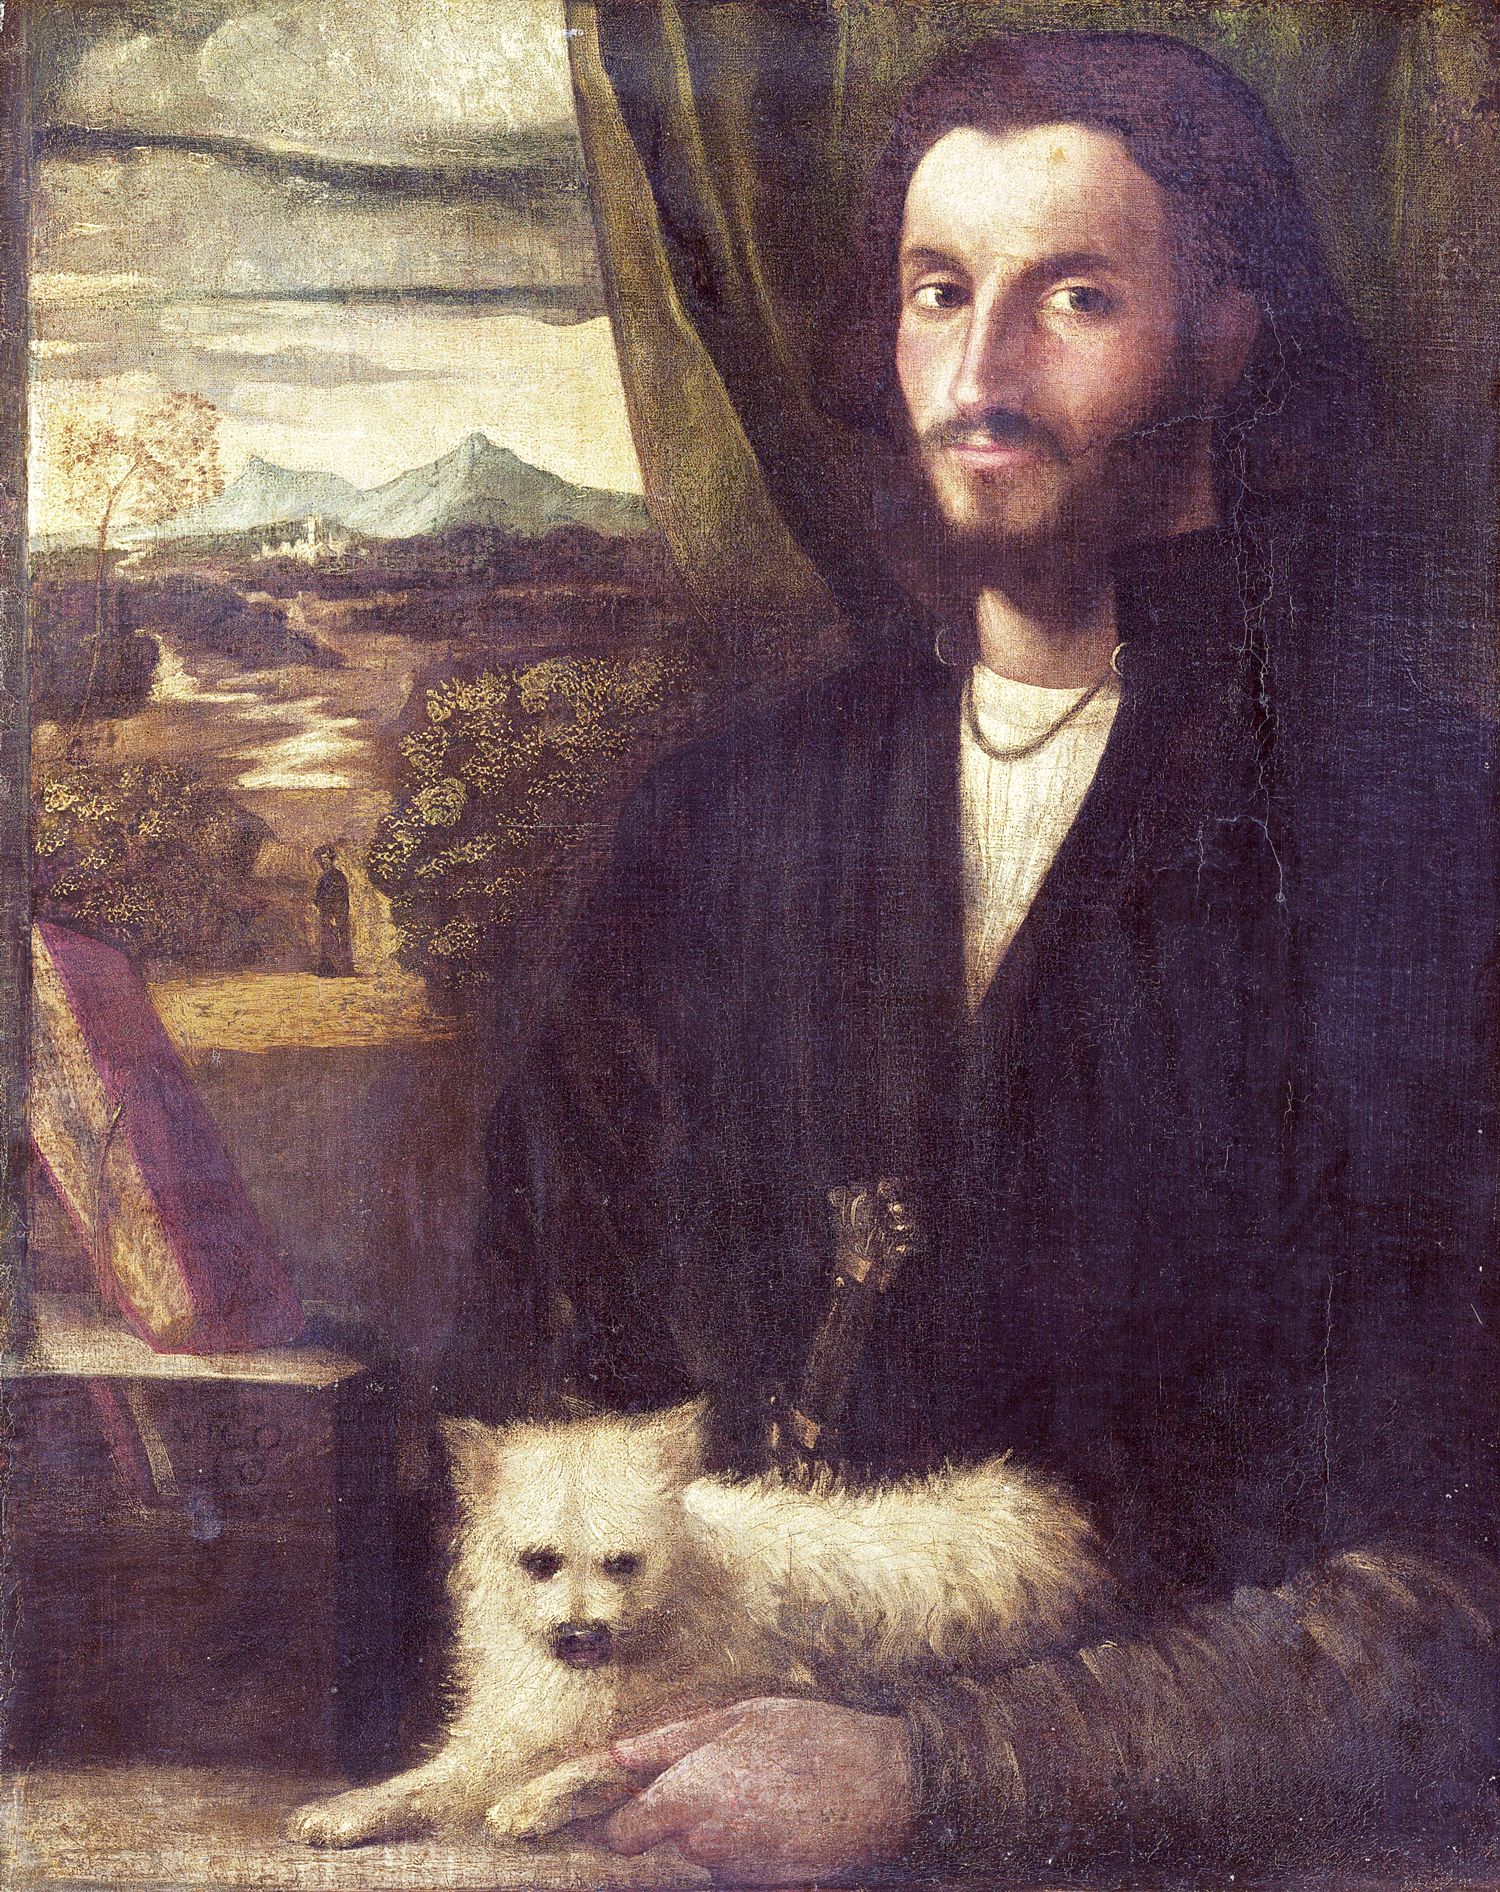 Cariani (Italian, 1485/1490 - 1547 or after ), Portrait of a Man with a Dog, c. 1520, oil on canvas, Gift of Samuel L. Fuller